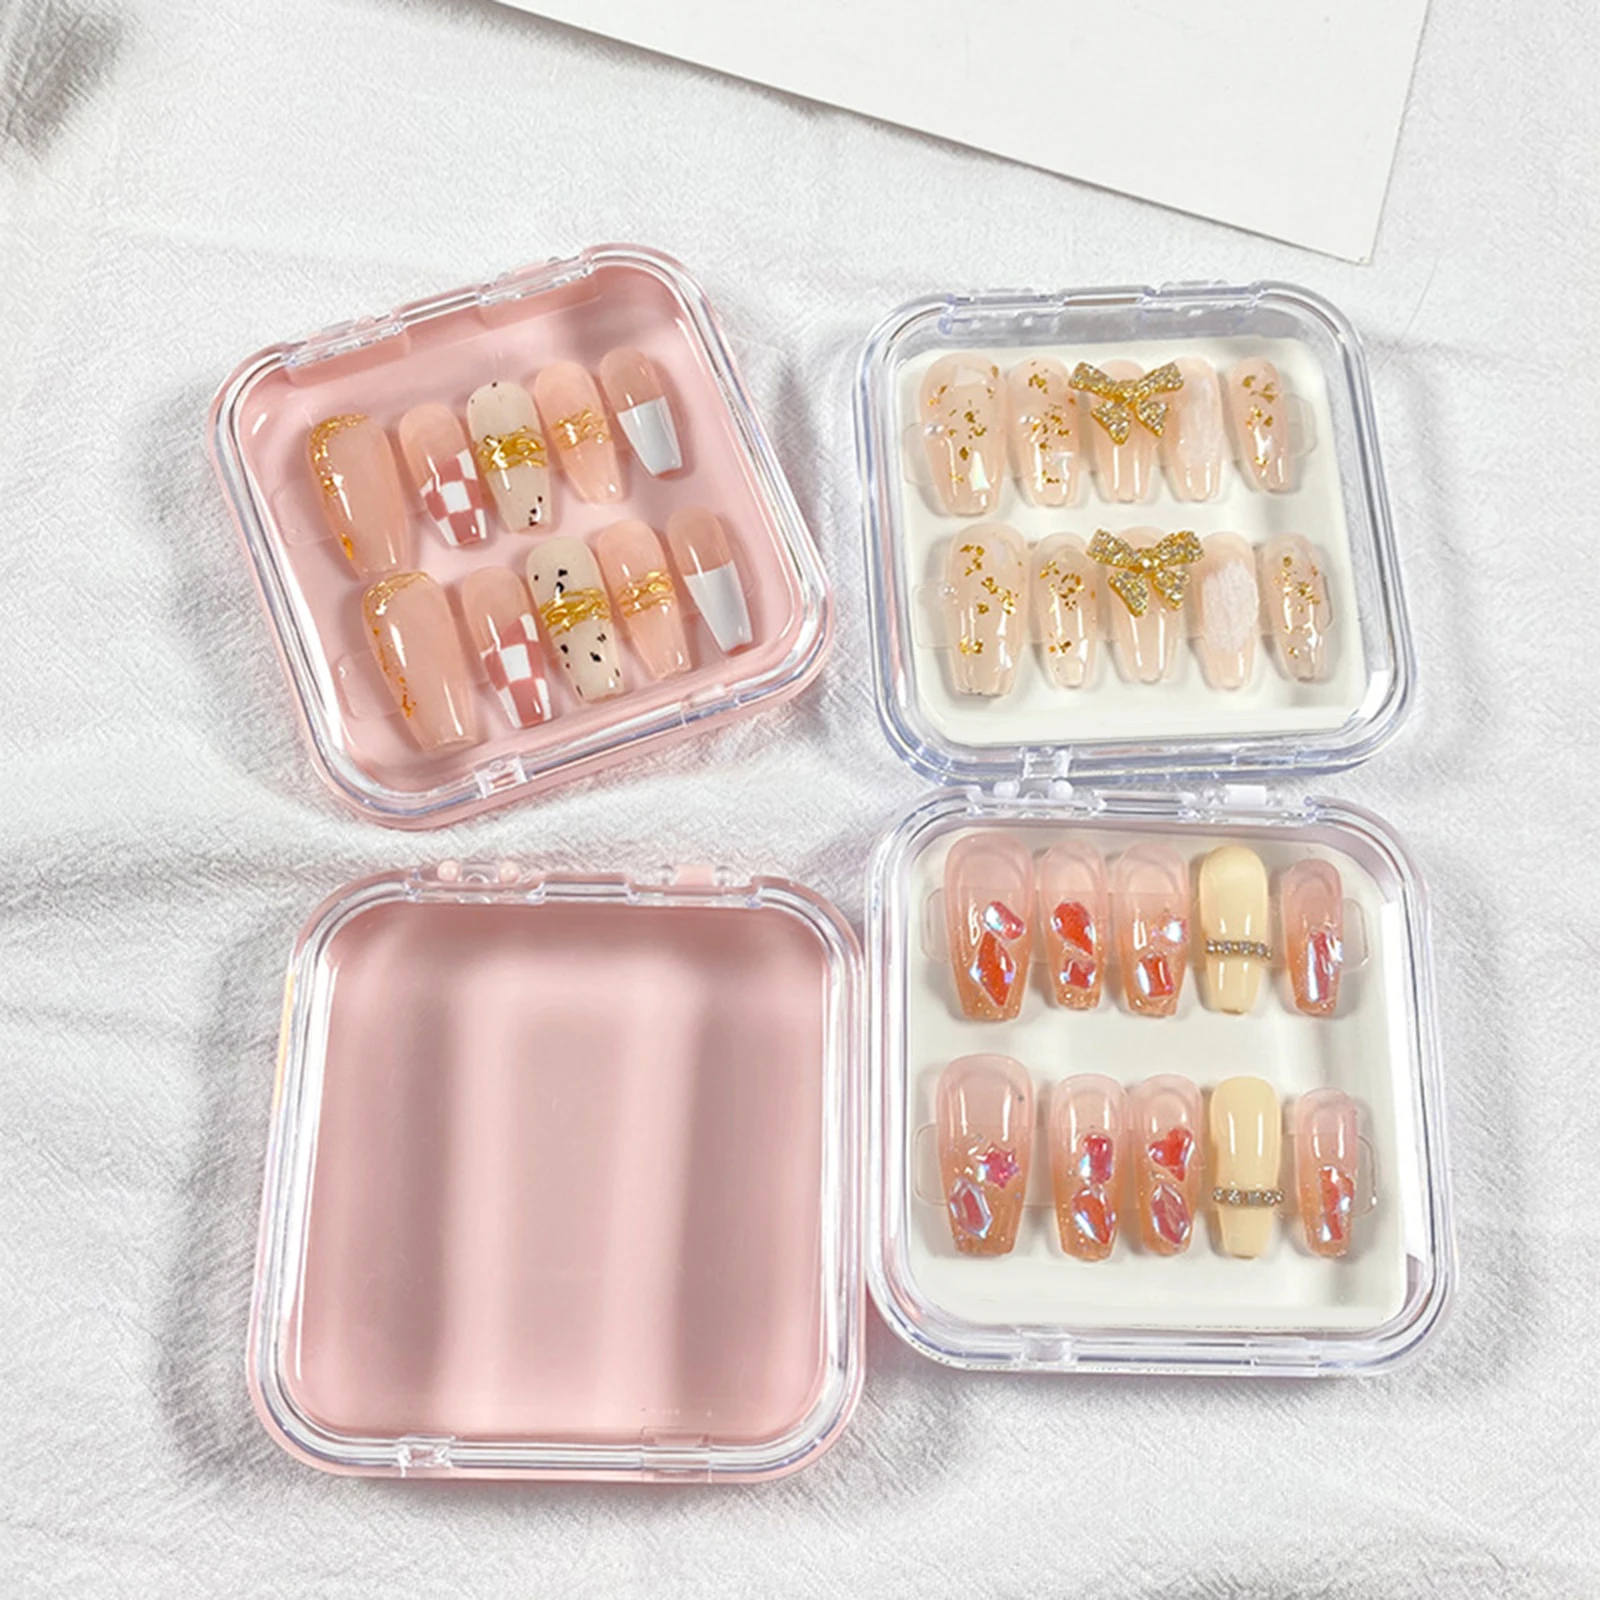 10x False Nail Packaging Boxes Press on Nail Storage Boxes Artificial Nail Art Display Organizer Case Holder for Salon（Box Only